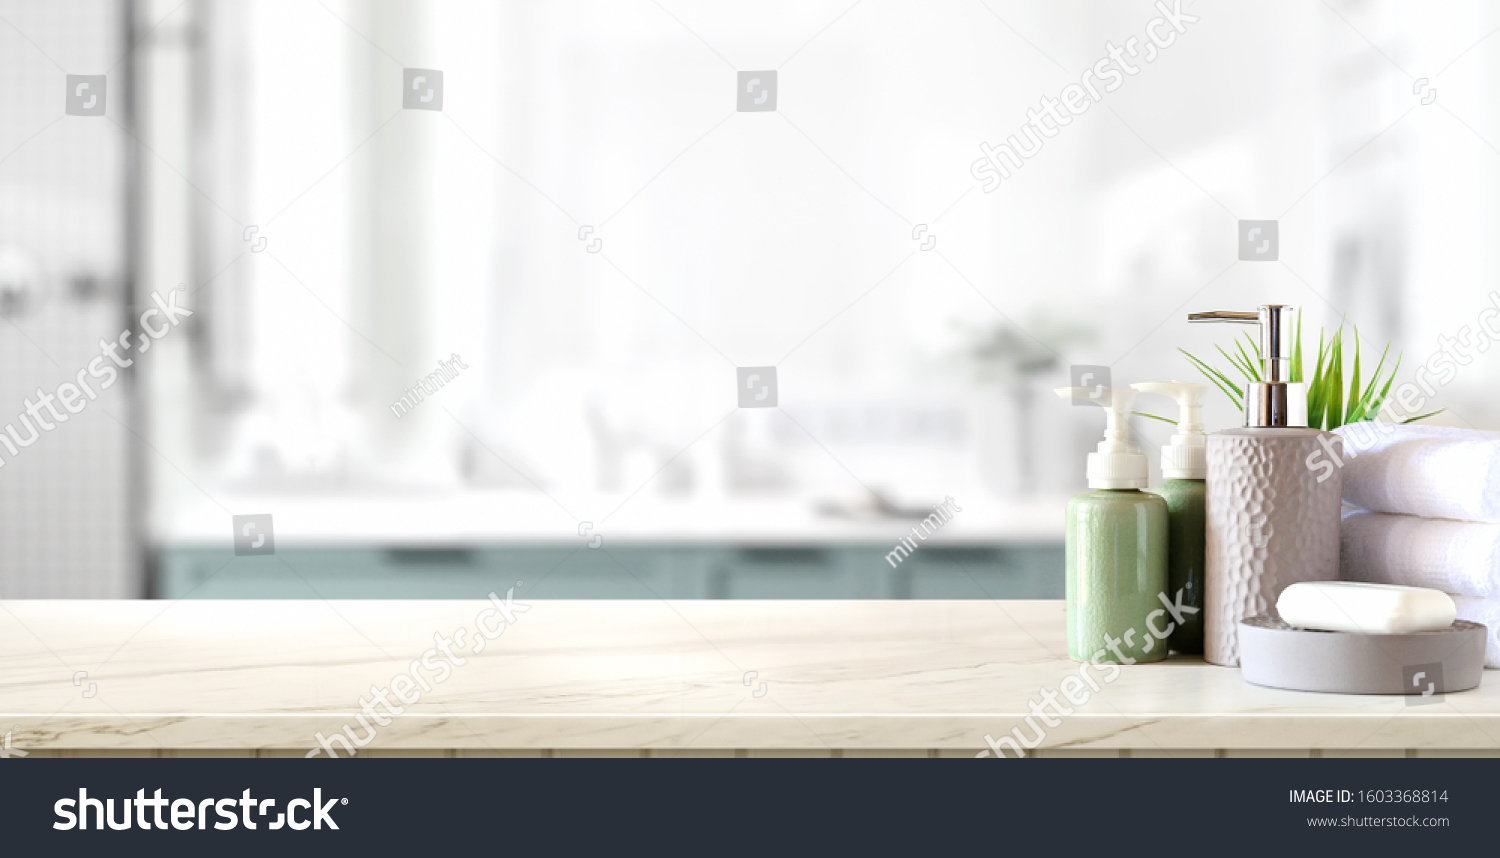 Close-up view of spa accessories on the table with spa in the background  #1603368814